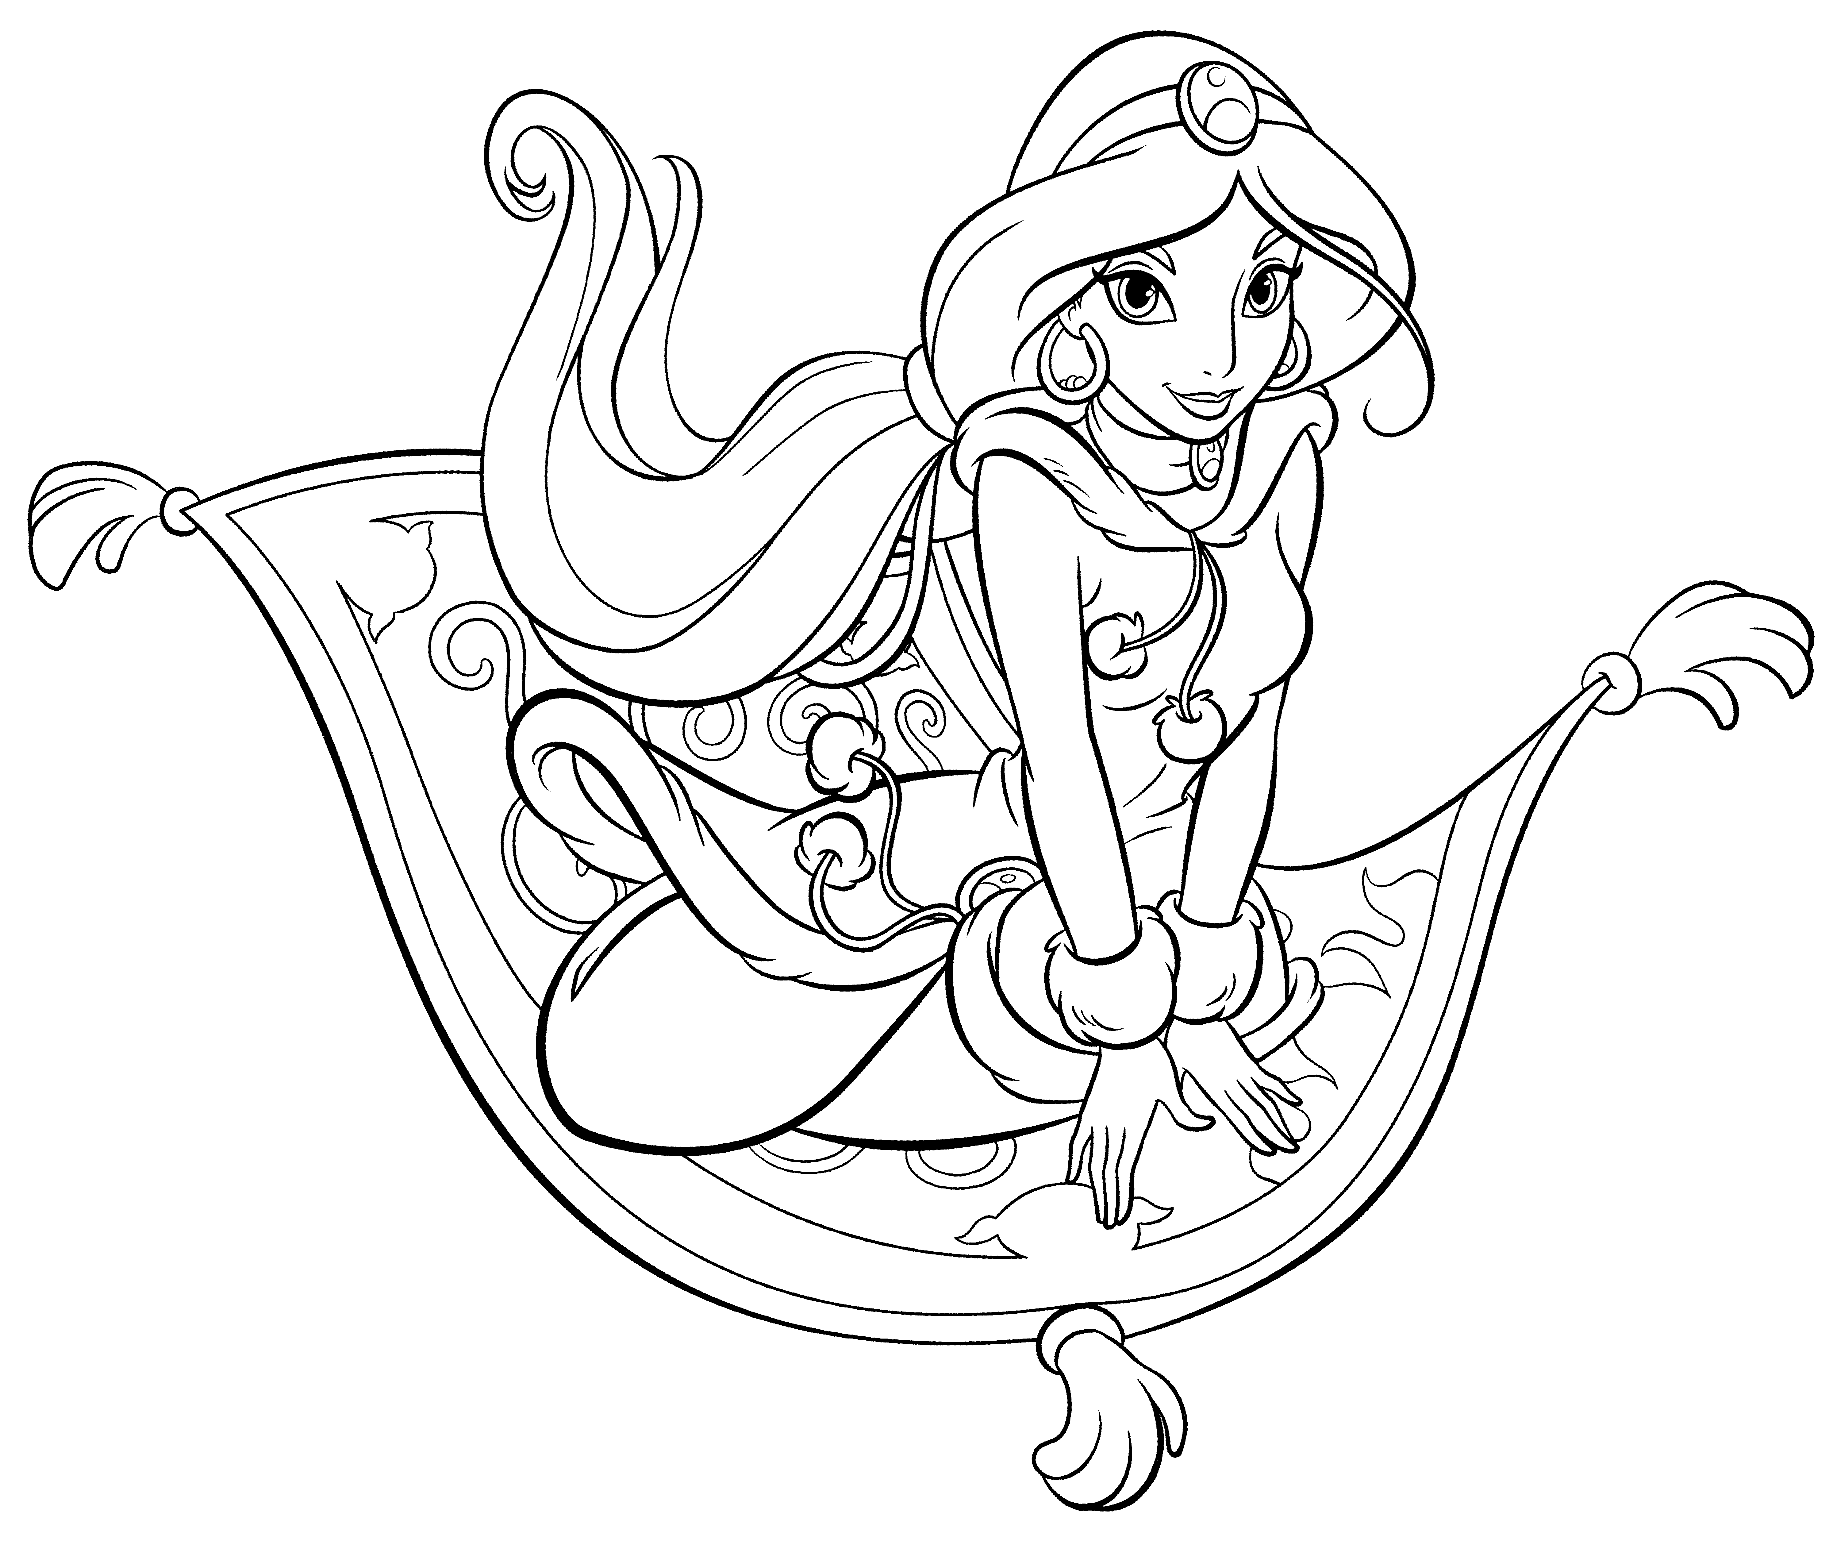 Jasmine on the carpet from Aladdin Coloring Pages   Jasmine ...